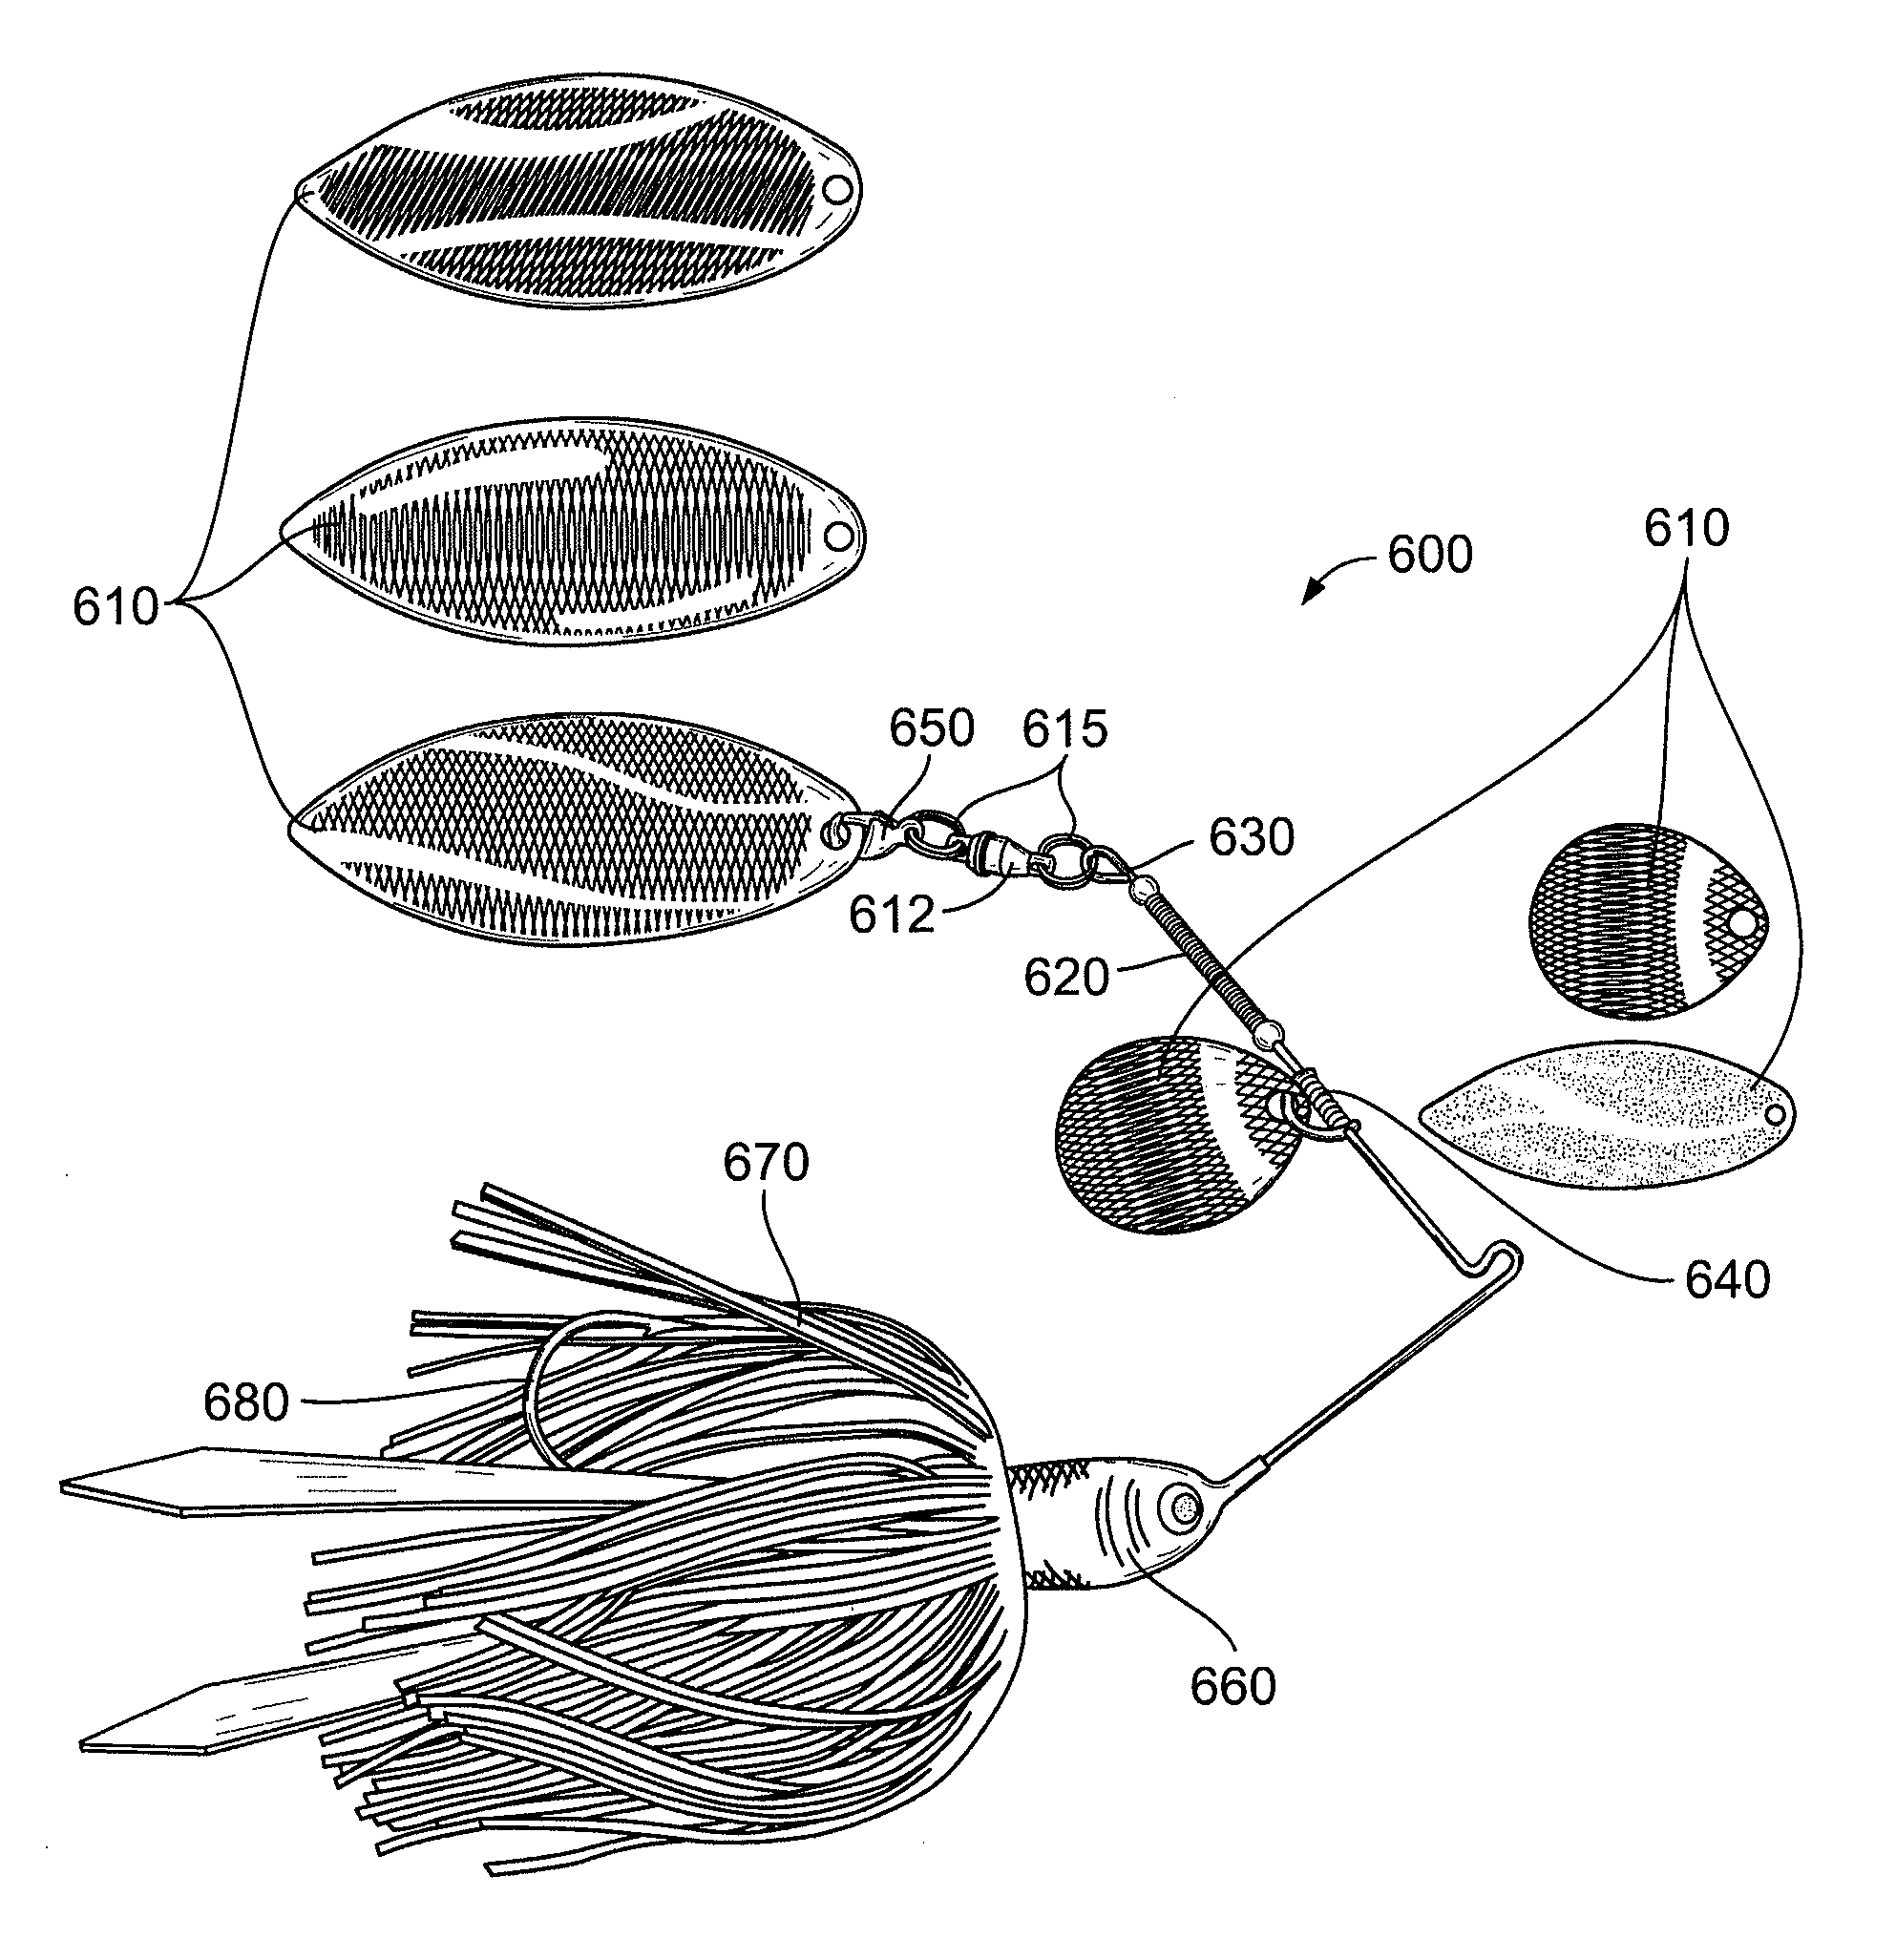 Fishing Lure and Attractors and Methods of Manufacture